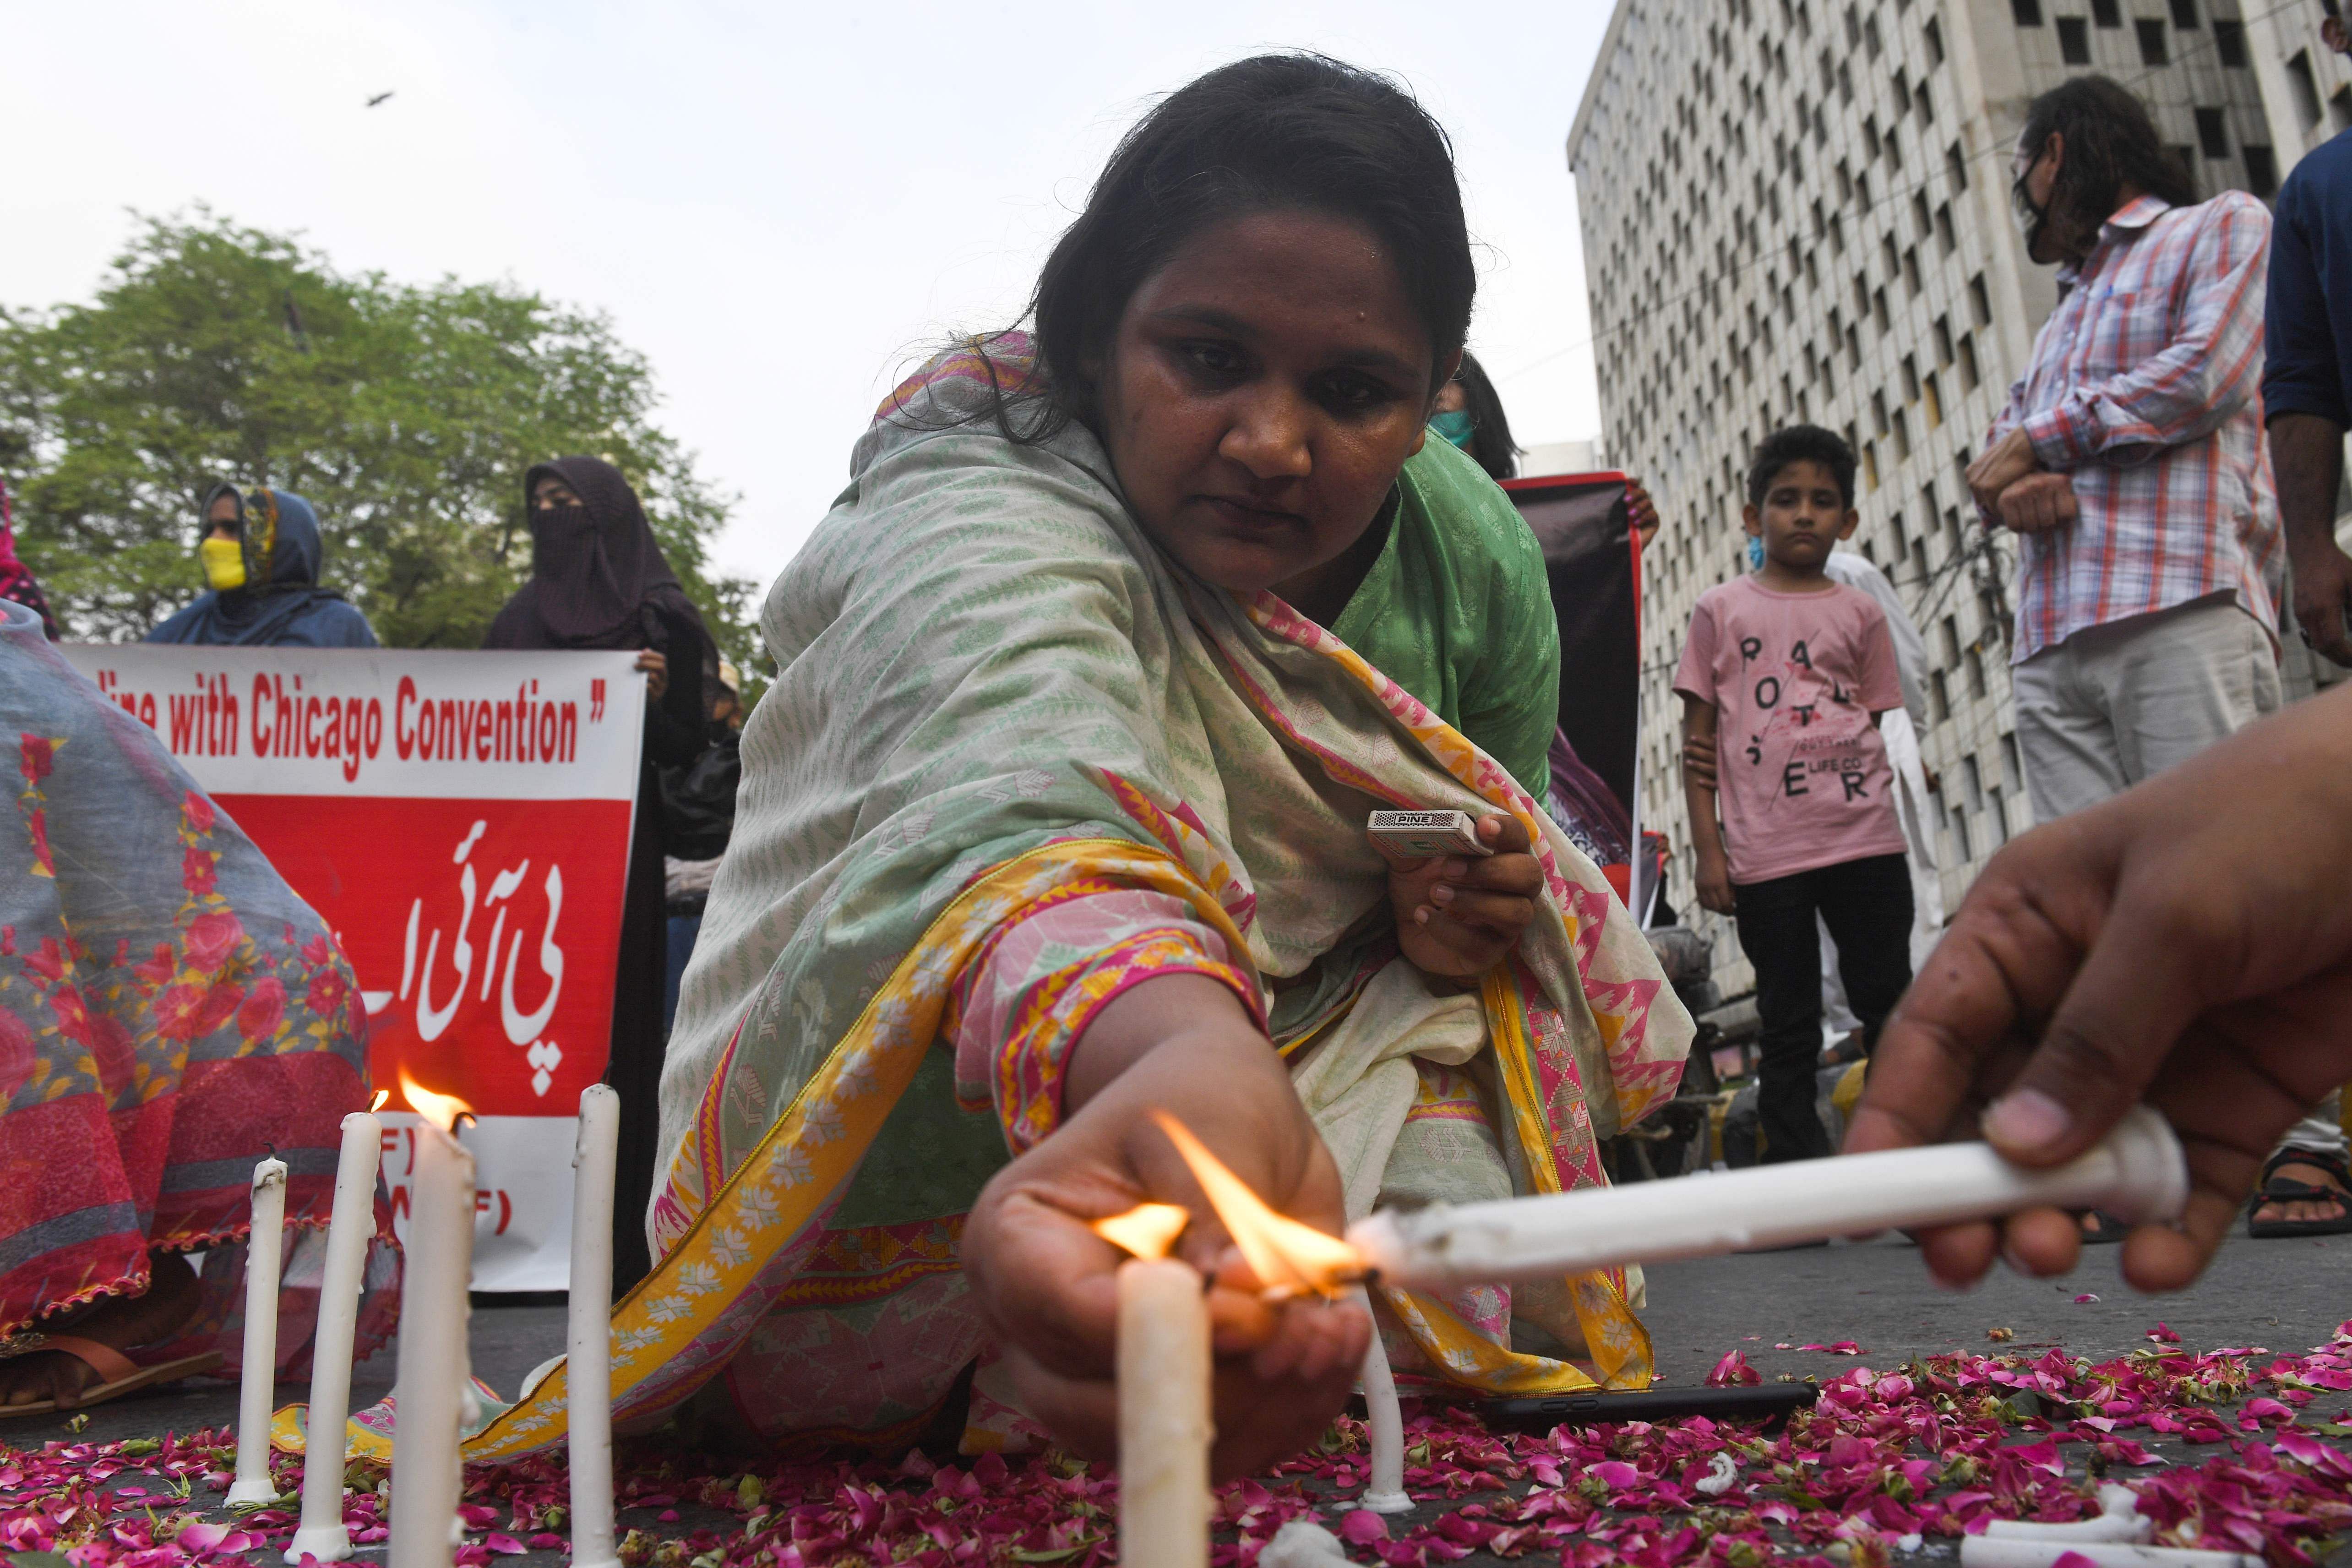 Trade union and civil society activists light candles in Karachi on May 28, 2020, during a candlelight vigil for the victims of the Pakistan International Airlines (PIA) plane crash on May 22. (AFP Photo)